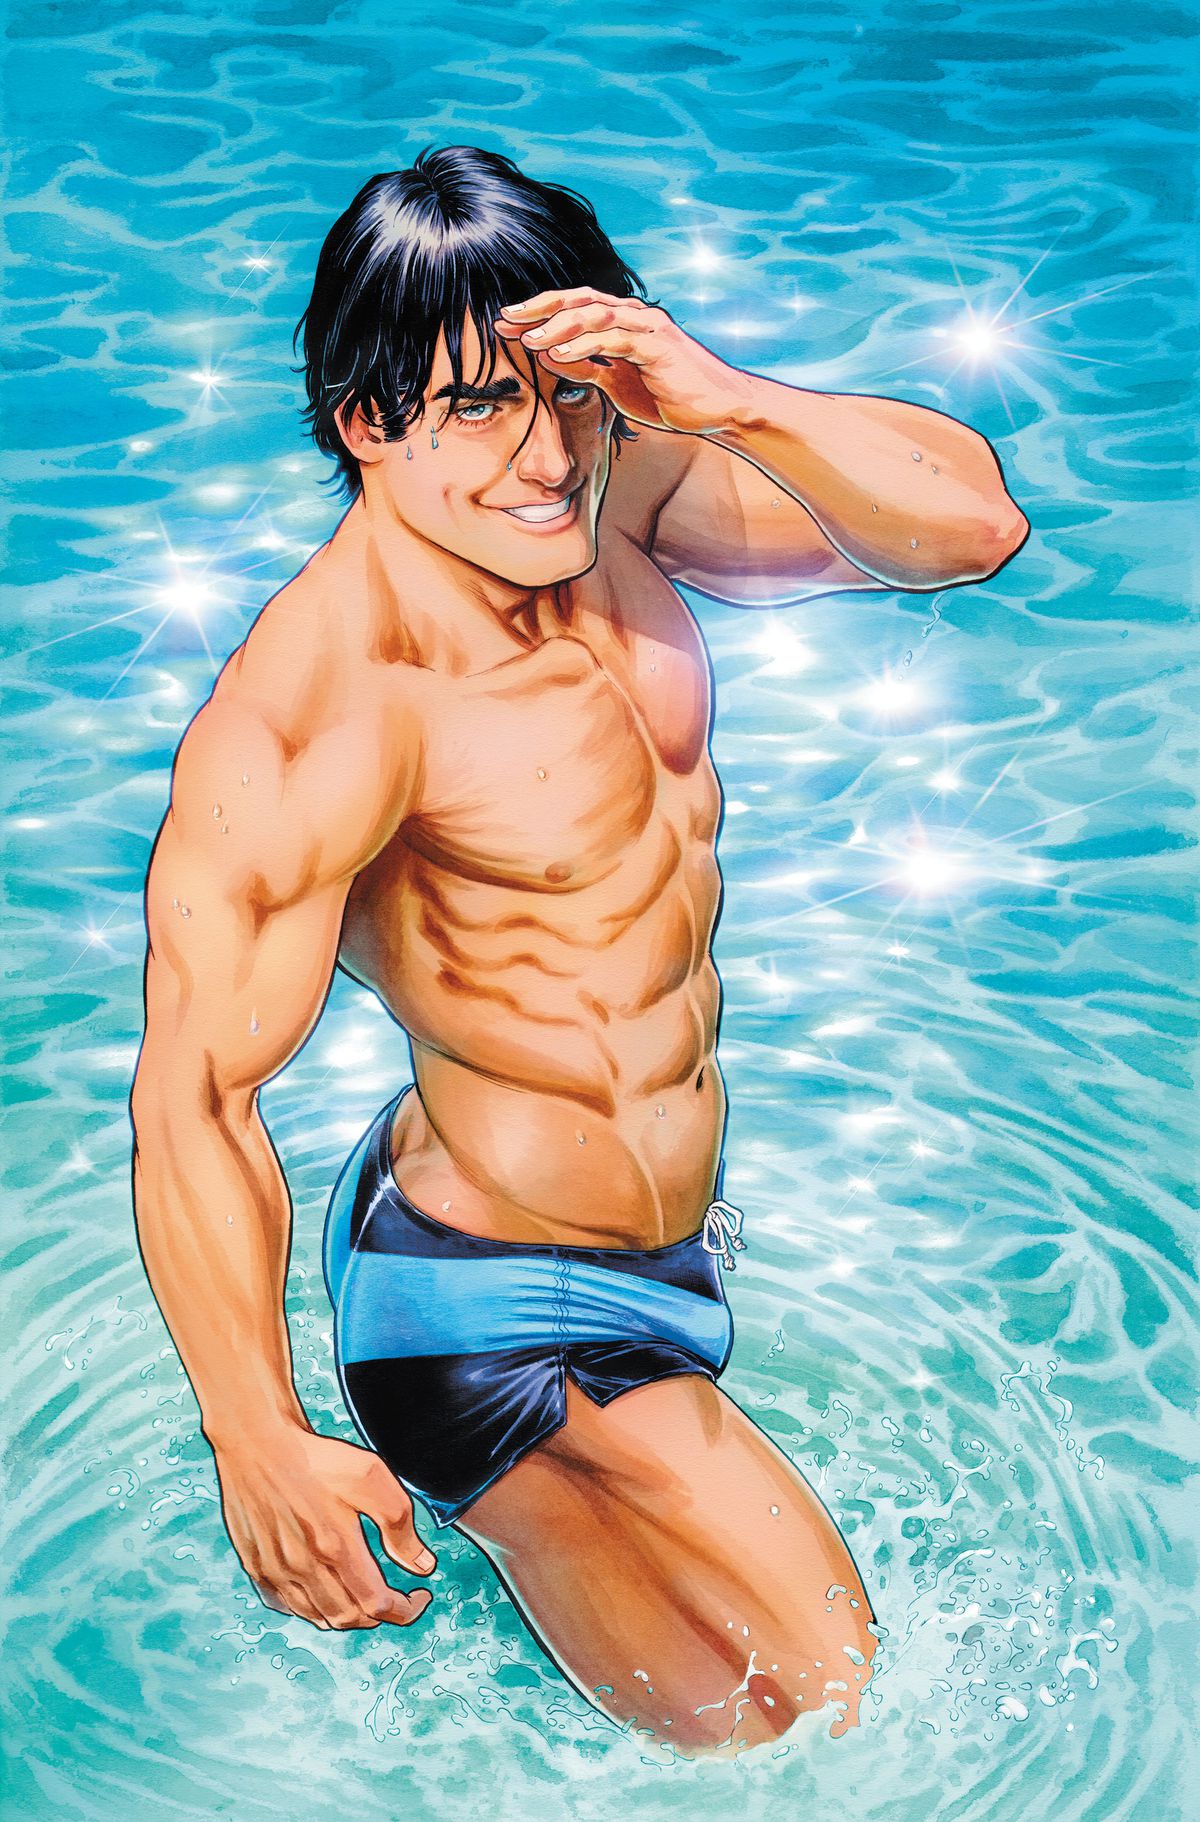 Nightwing shades his eyes from the sun as he looks over his shoulder at the viewer. He’s standing in glistening clear water up to his thighs, and his butt is very well highlighted by his tiny swimsuit. 